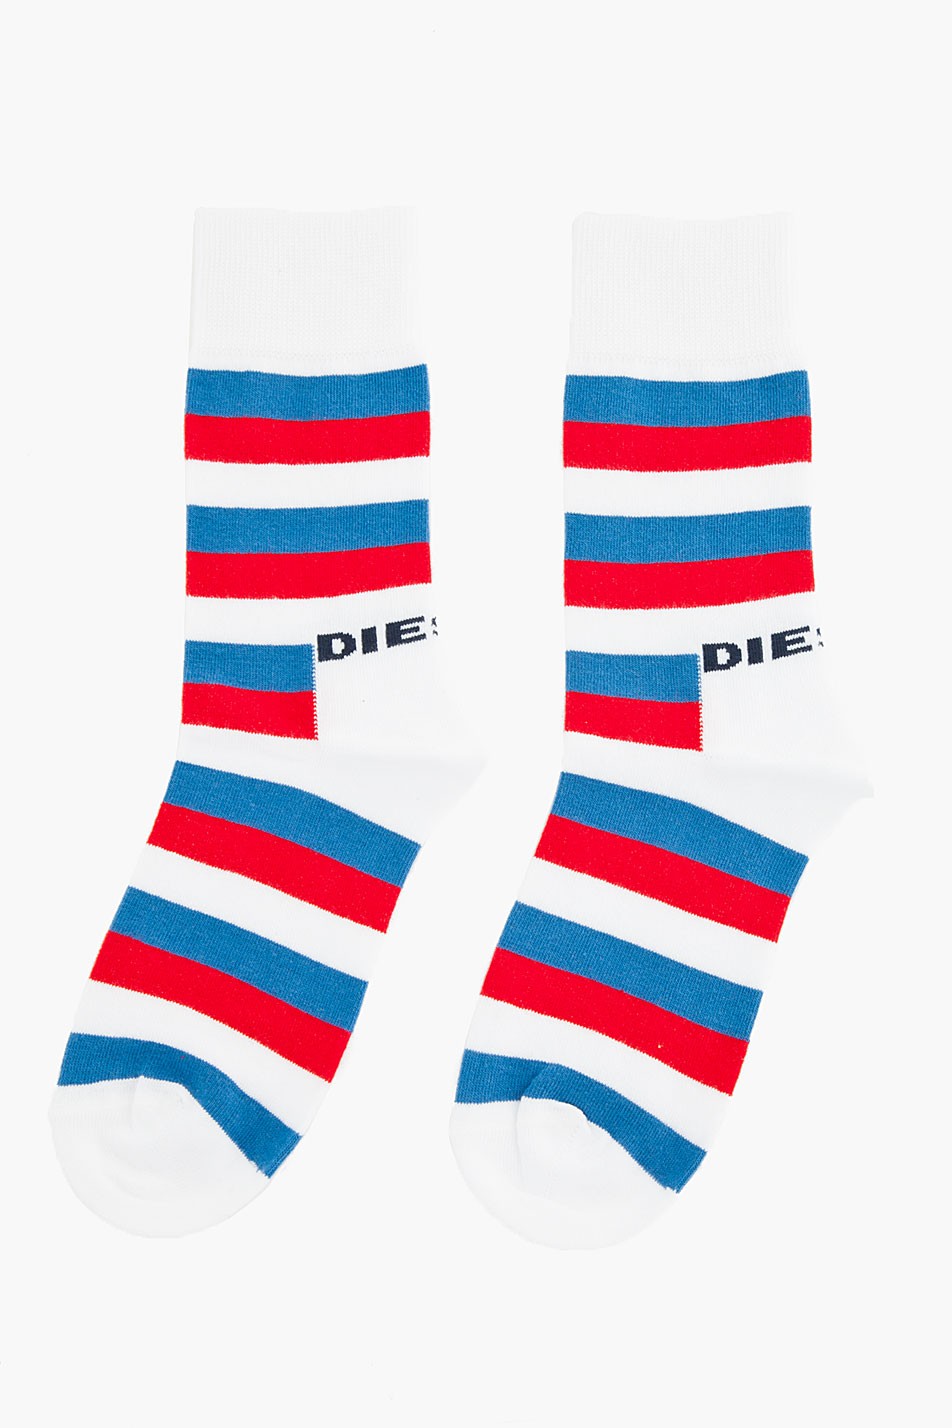 DIESEL White Red and Blue Striped Hunion Socks in White for Men - Lyst